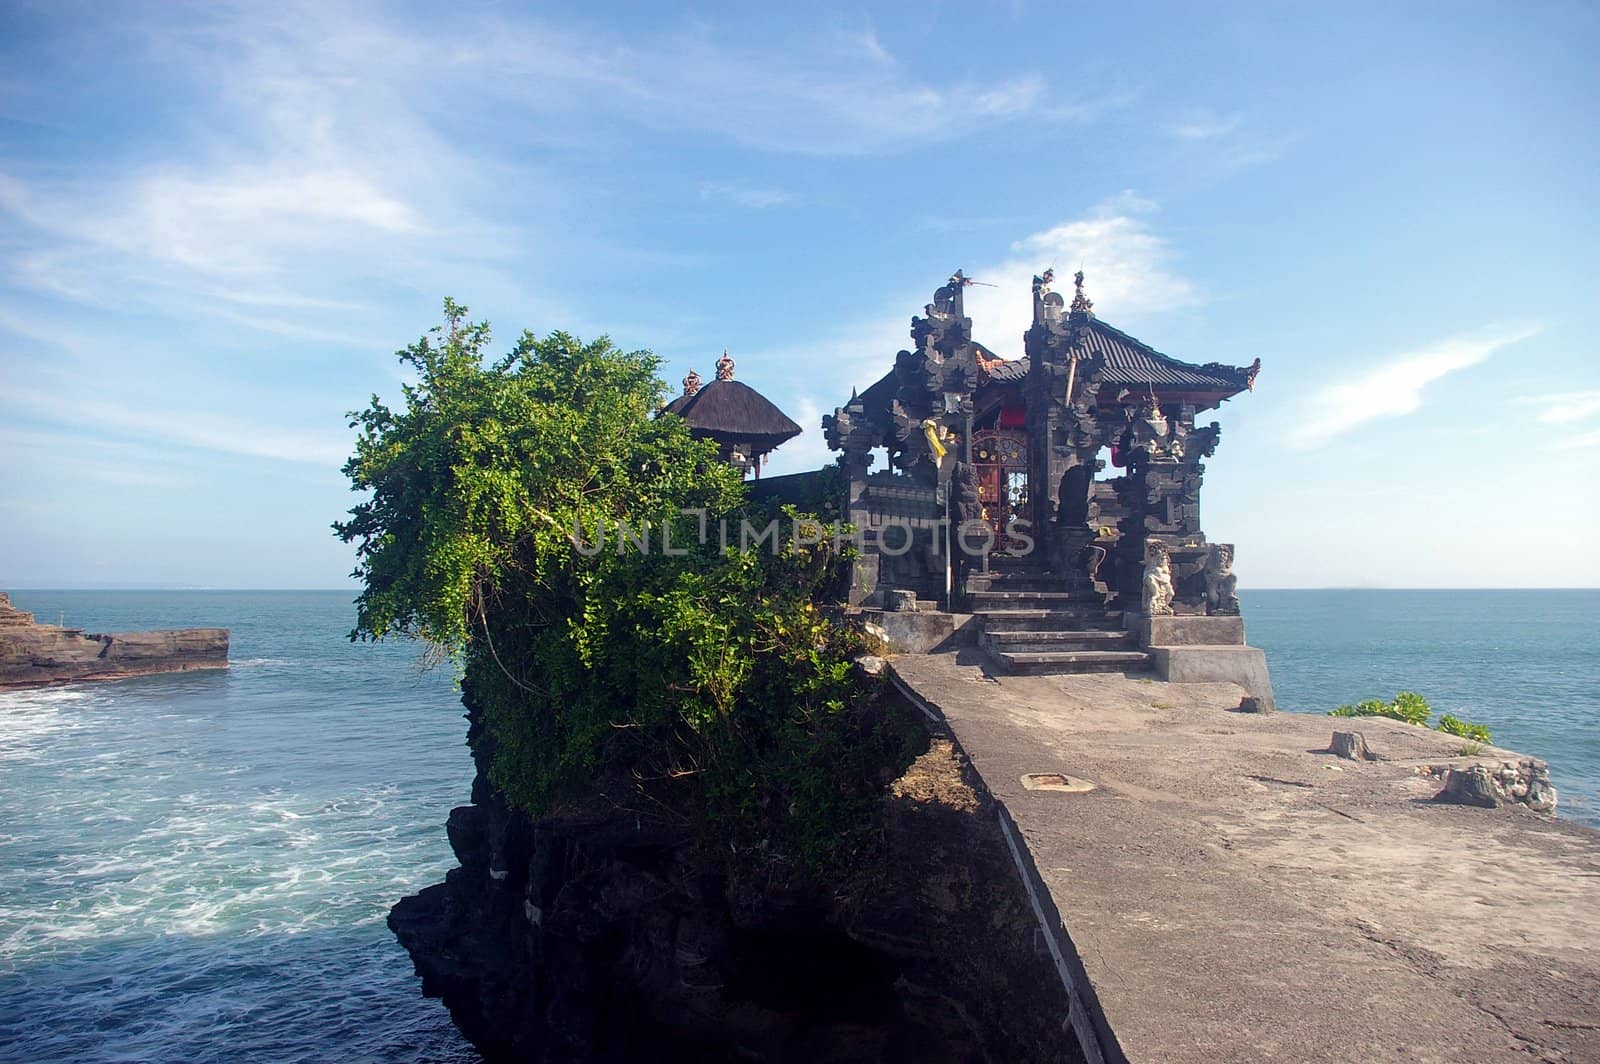 One of the temples at Tanah Lot. This area is a popular tourist destination. Tanah Lot, Bali, Indonesia.